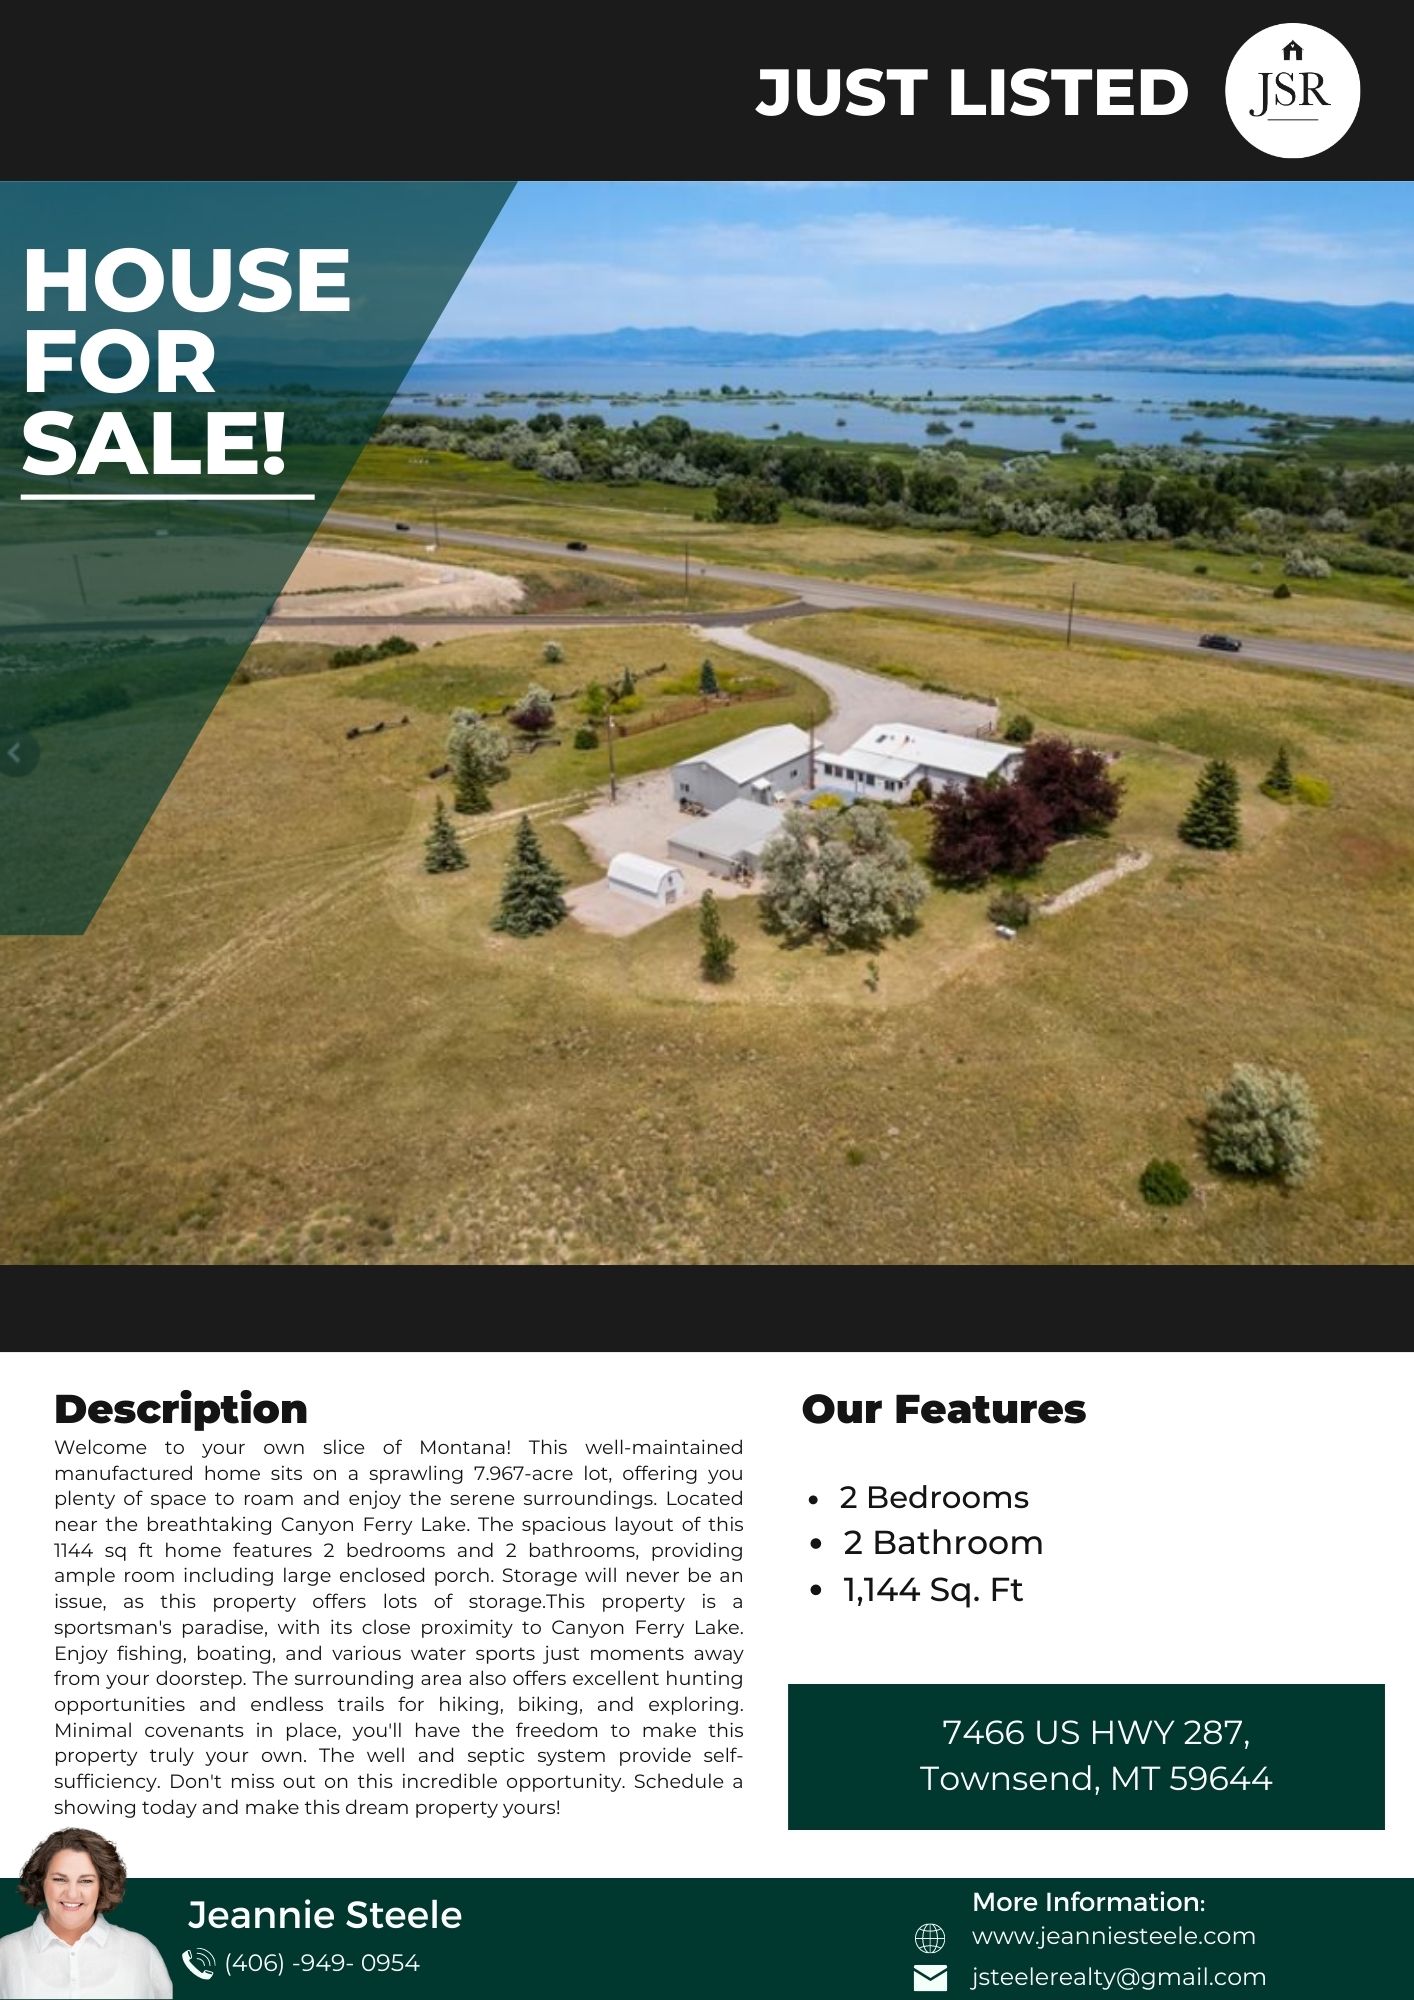 Your Montana Retreat Awaits: 7.967 Acres of Bliss at 7466 US HWY 287, Townsend, Montana